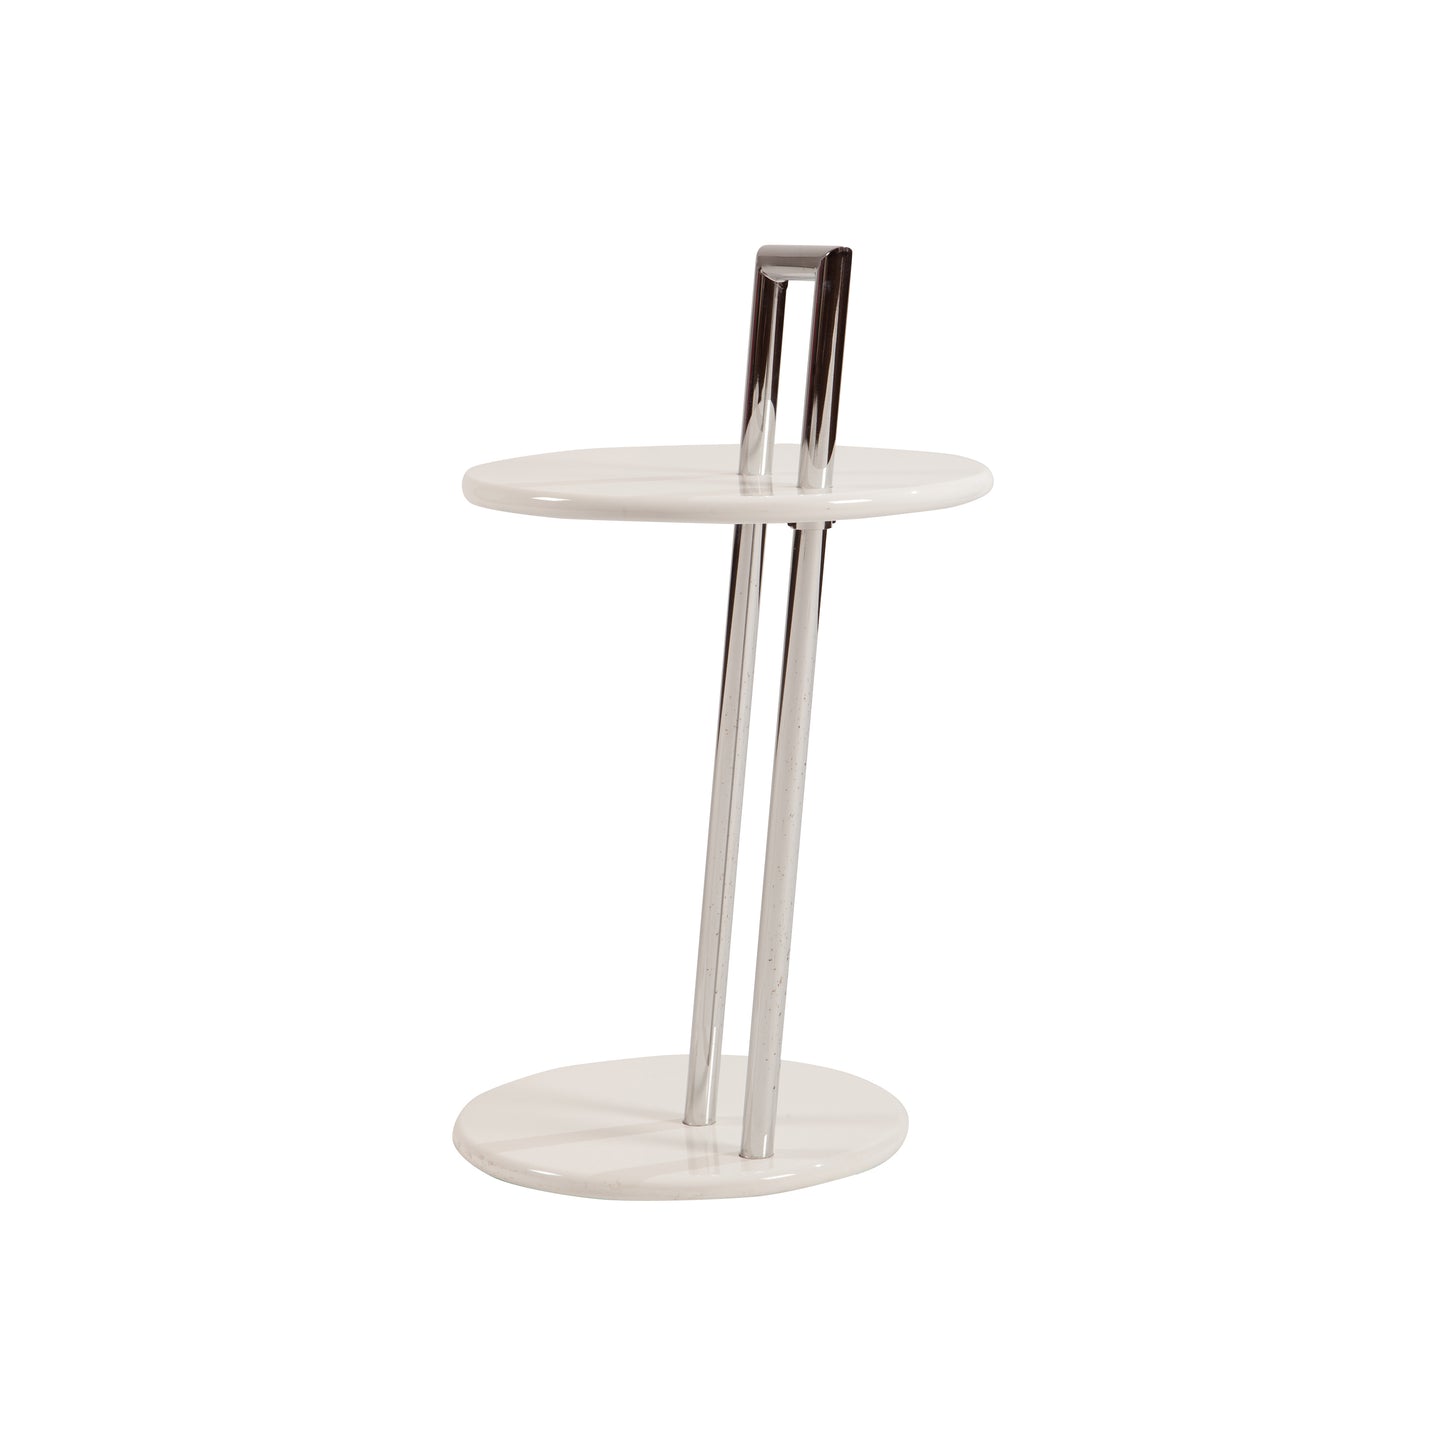 The occasional table style | White | Side